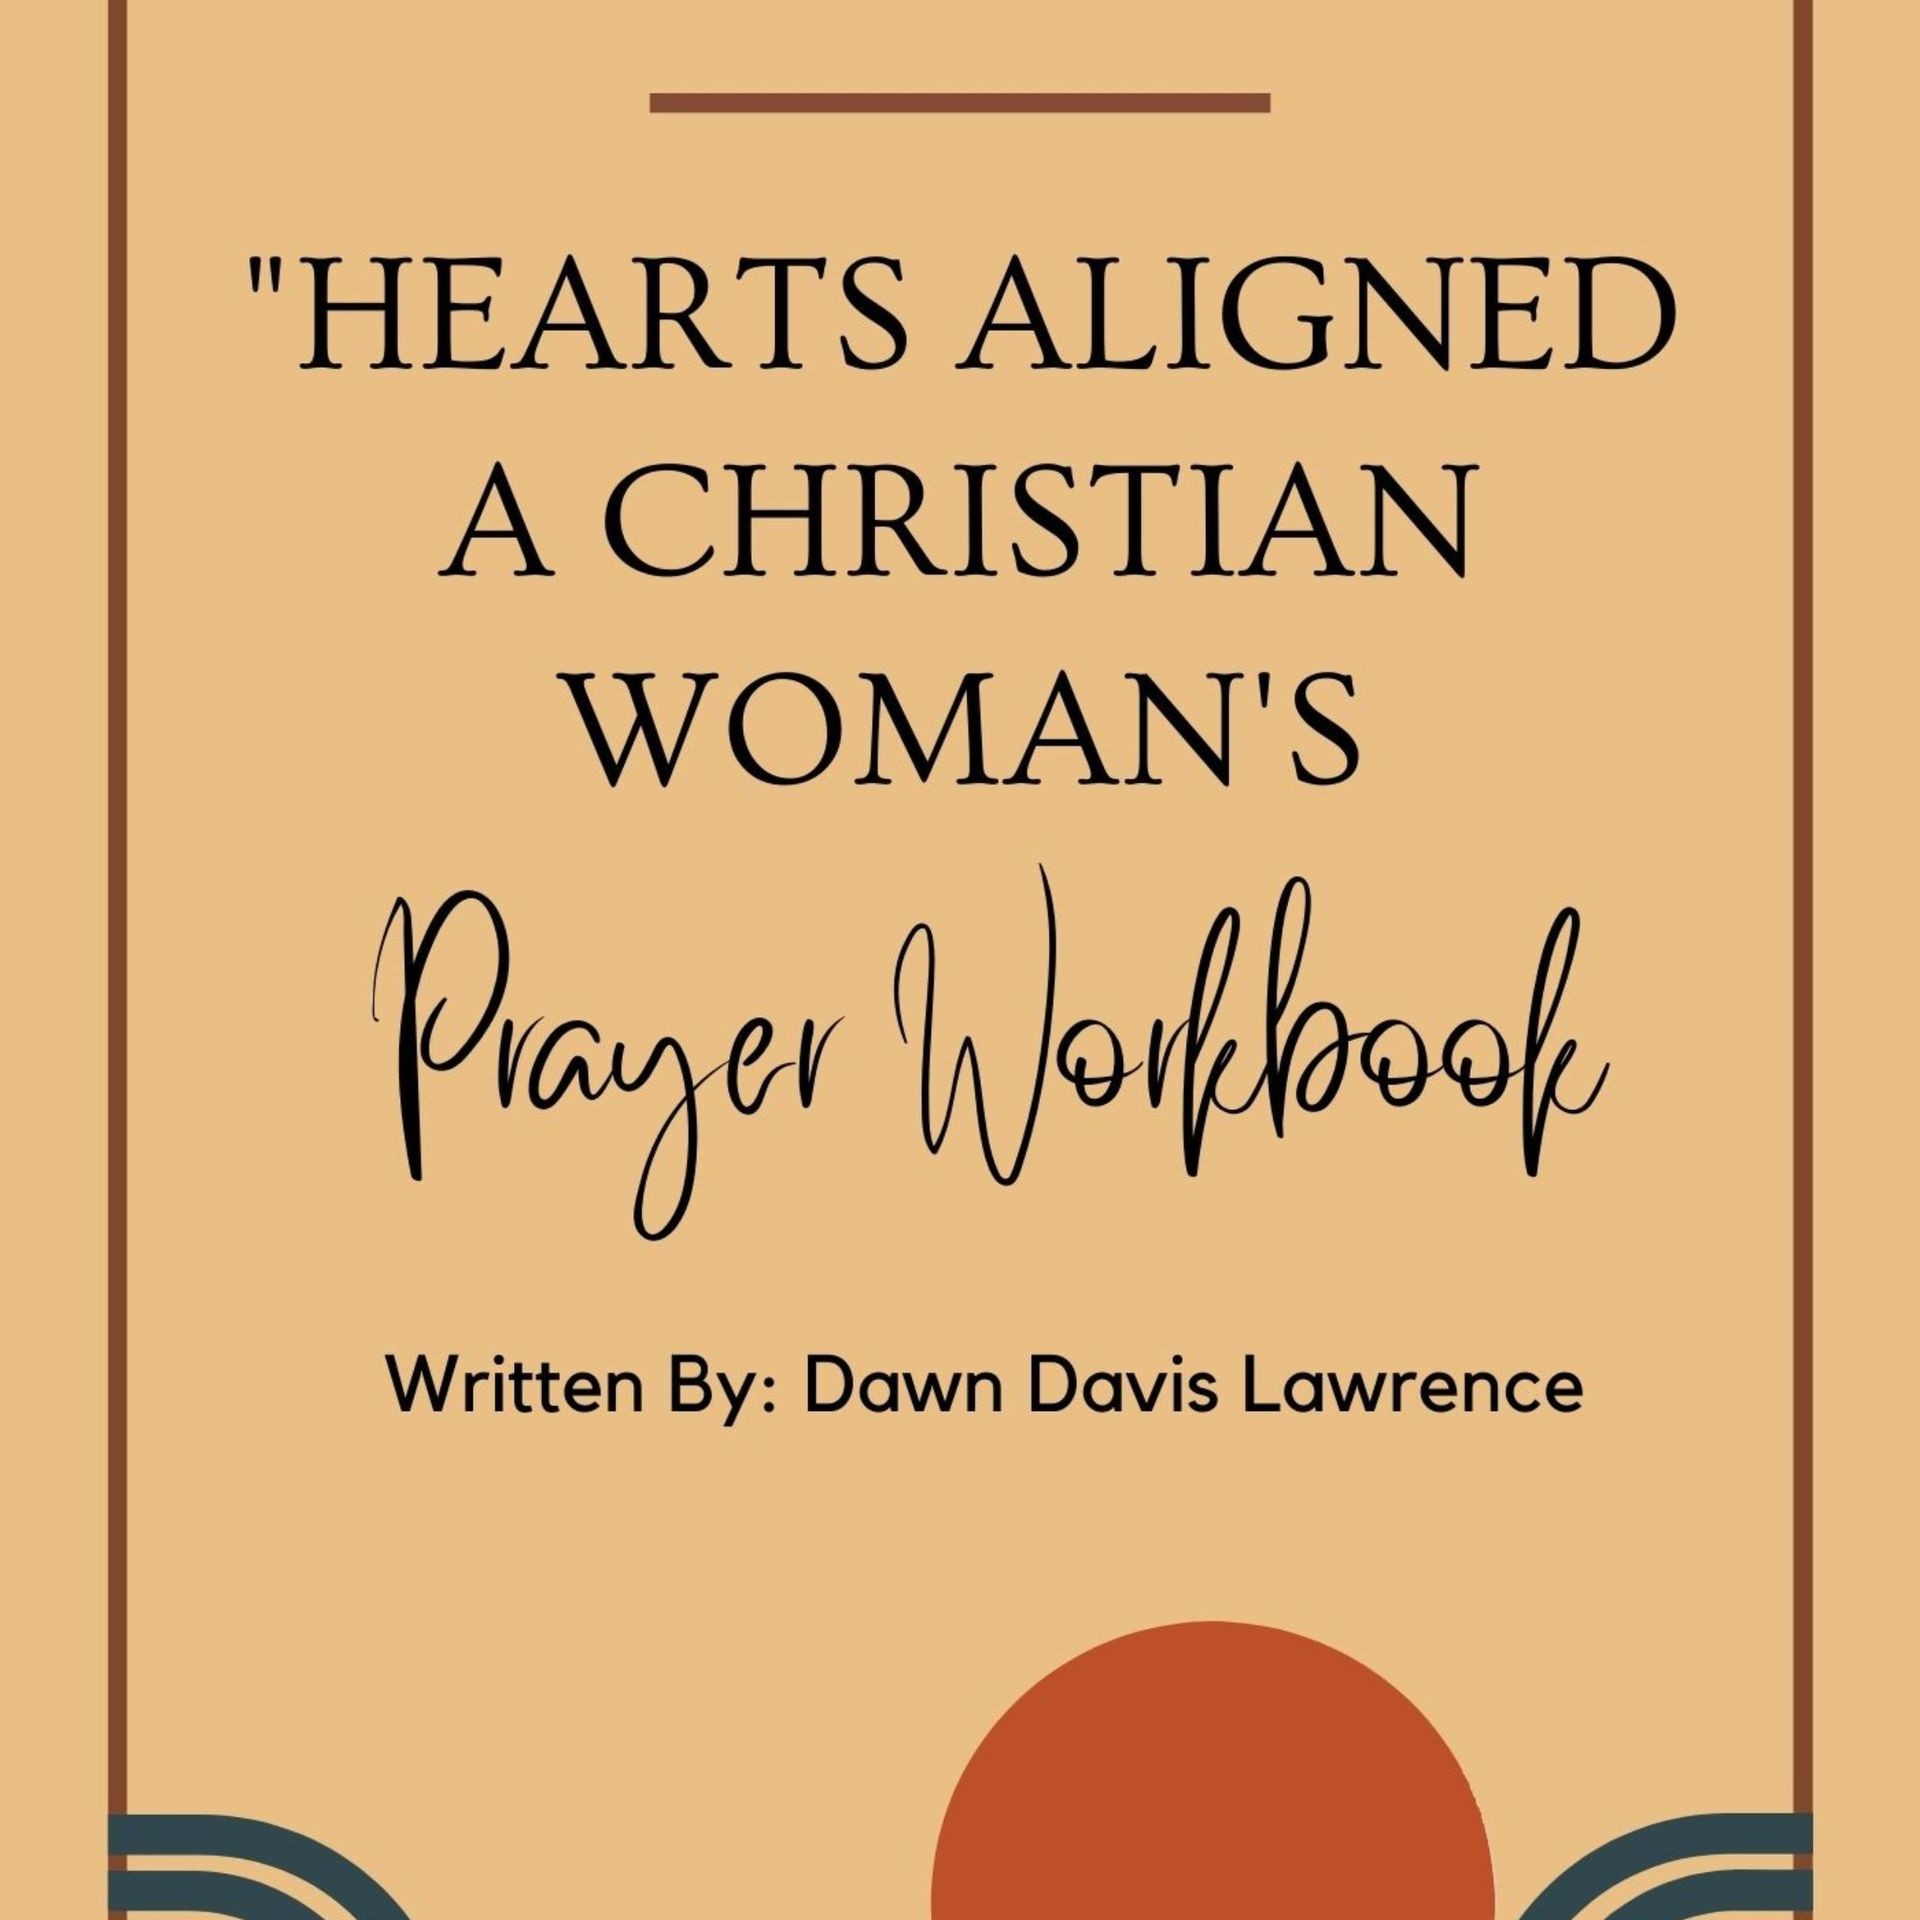 Hearts Aligned: A Christian Woman's Workbook